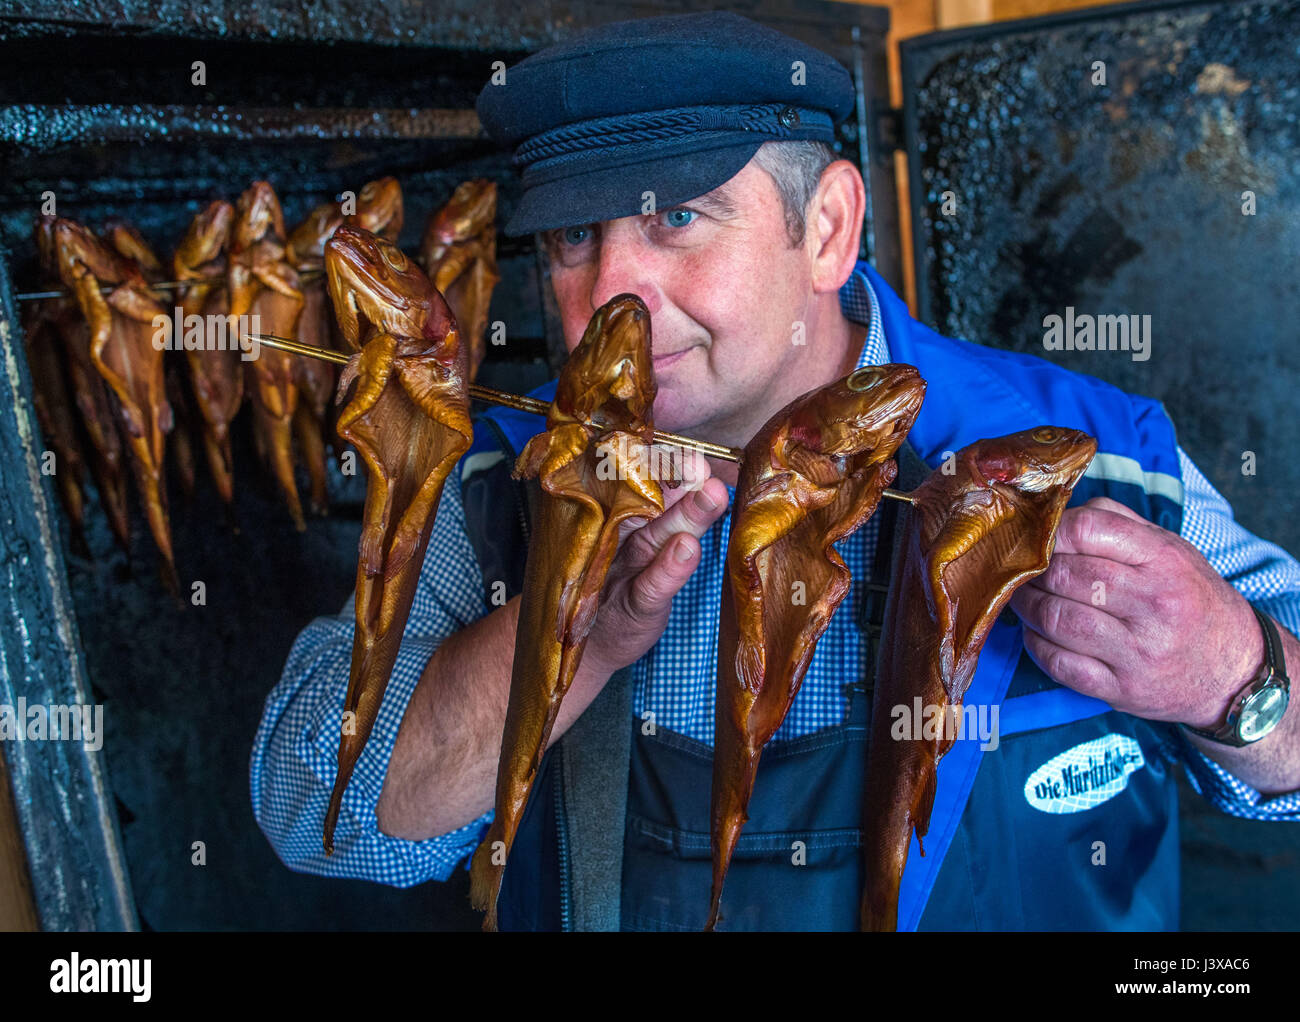 Vipperow, Germany. 4th May, 2017. dpatop - Inland fisher Guenter Zillmann retrieves freshly smoked char from the oven at the fish farm at the Mueritz in Vipperow, Germany, 4 May 2017. The fish farm is part of the largest inland fishery in Germany: Fishery Mueitz-Plau GmbH. Besides the tradition fishery and the breeding of fish, modern aqua culture is also part of the business. The fishery, founded in 1990 from the former production cooperative (founded 1952) holds more than 30.000 hectars of water. Photo: Jens Büttner/dpa-Zentralbild/dpa/Alamy Live News Stock Photo